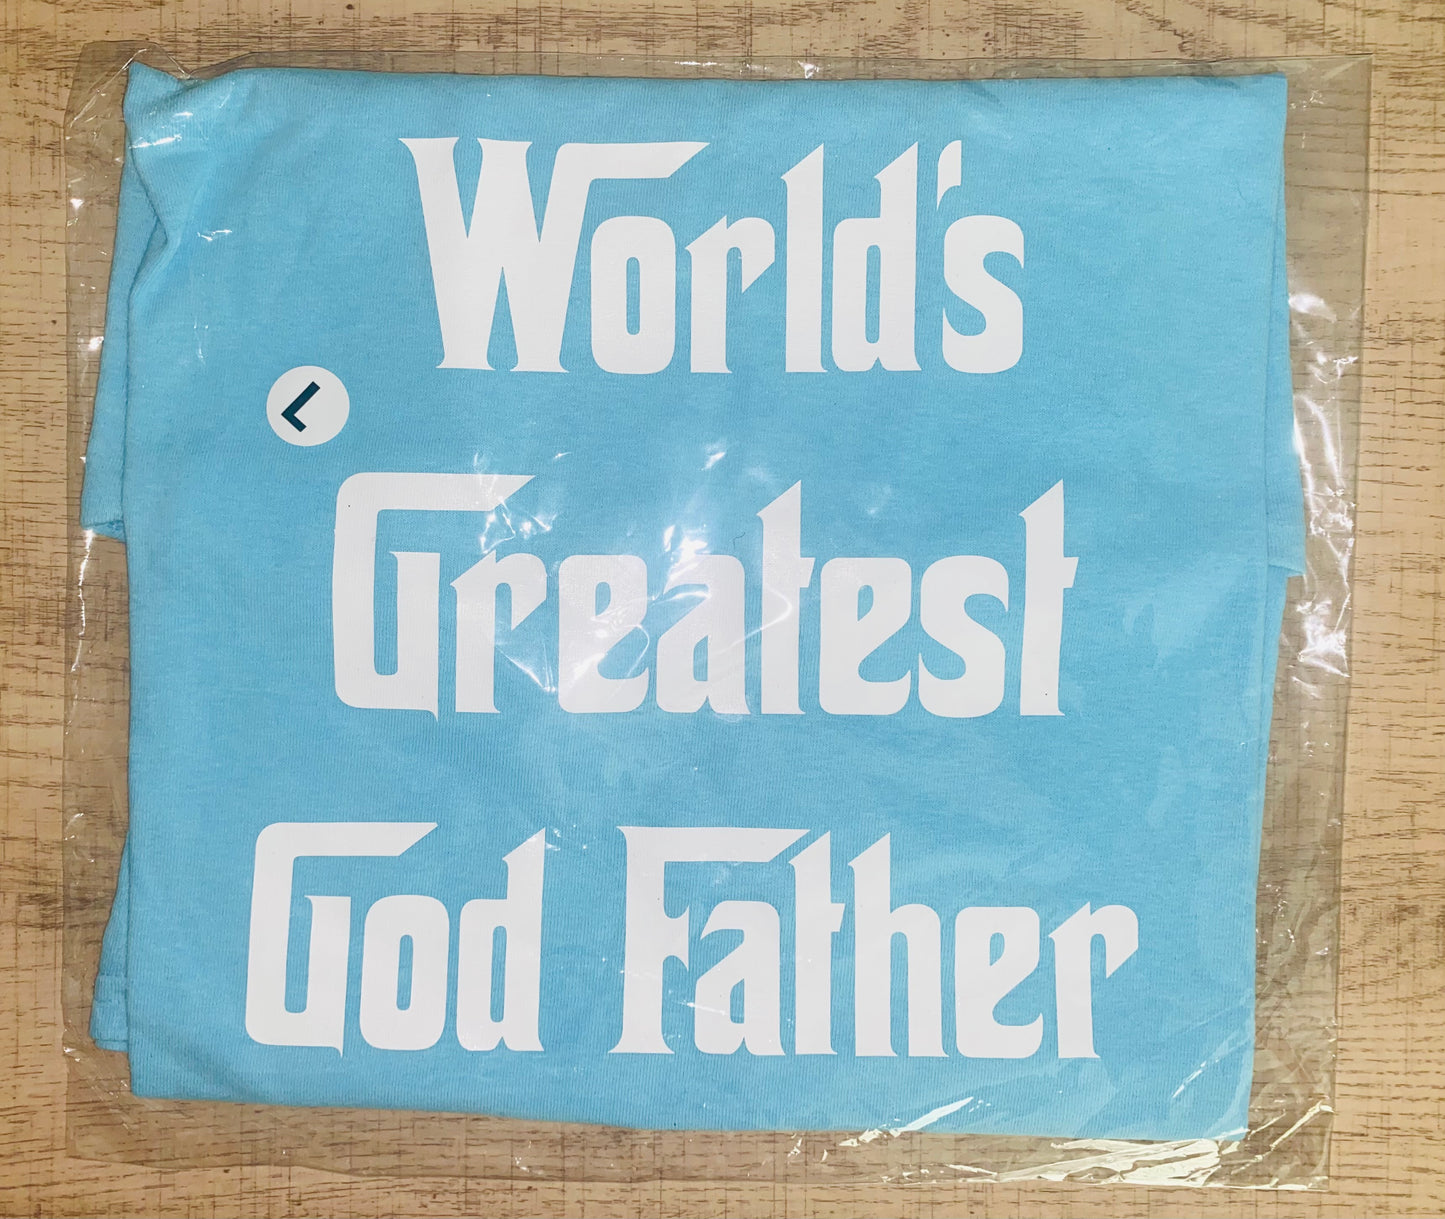 Dad Life Tee ~ World's Greatest God Father